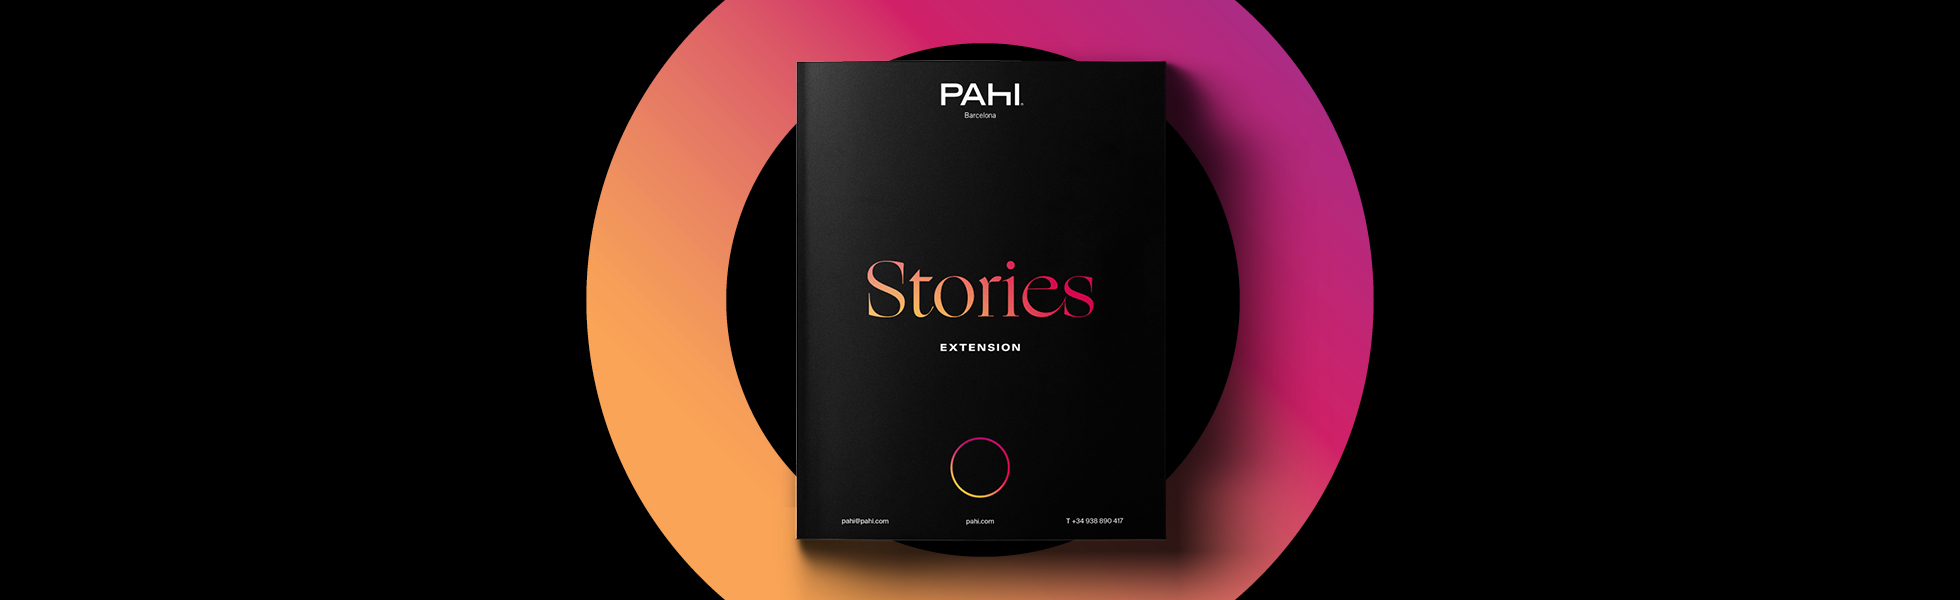 Browse PAHI's products